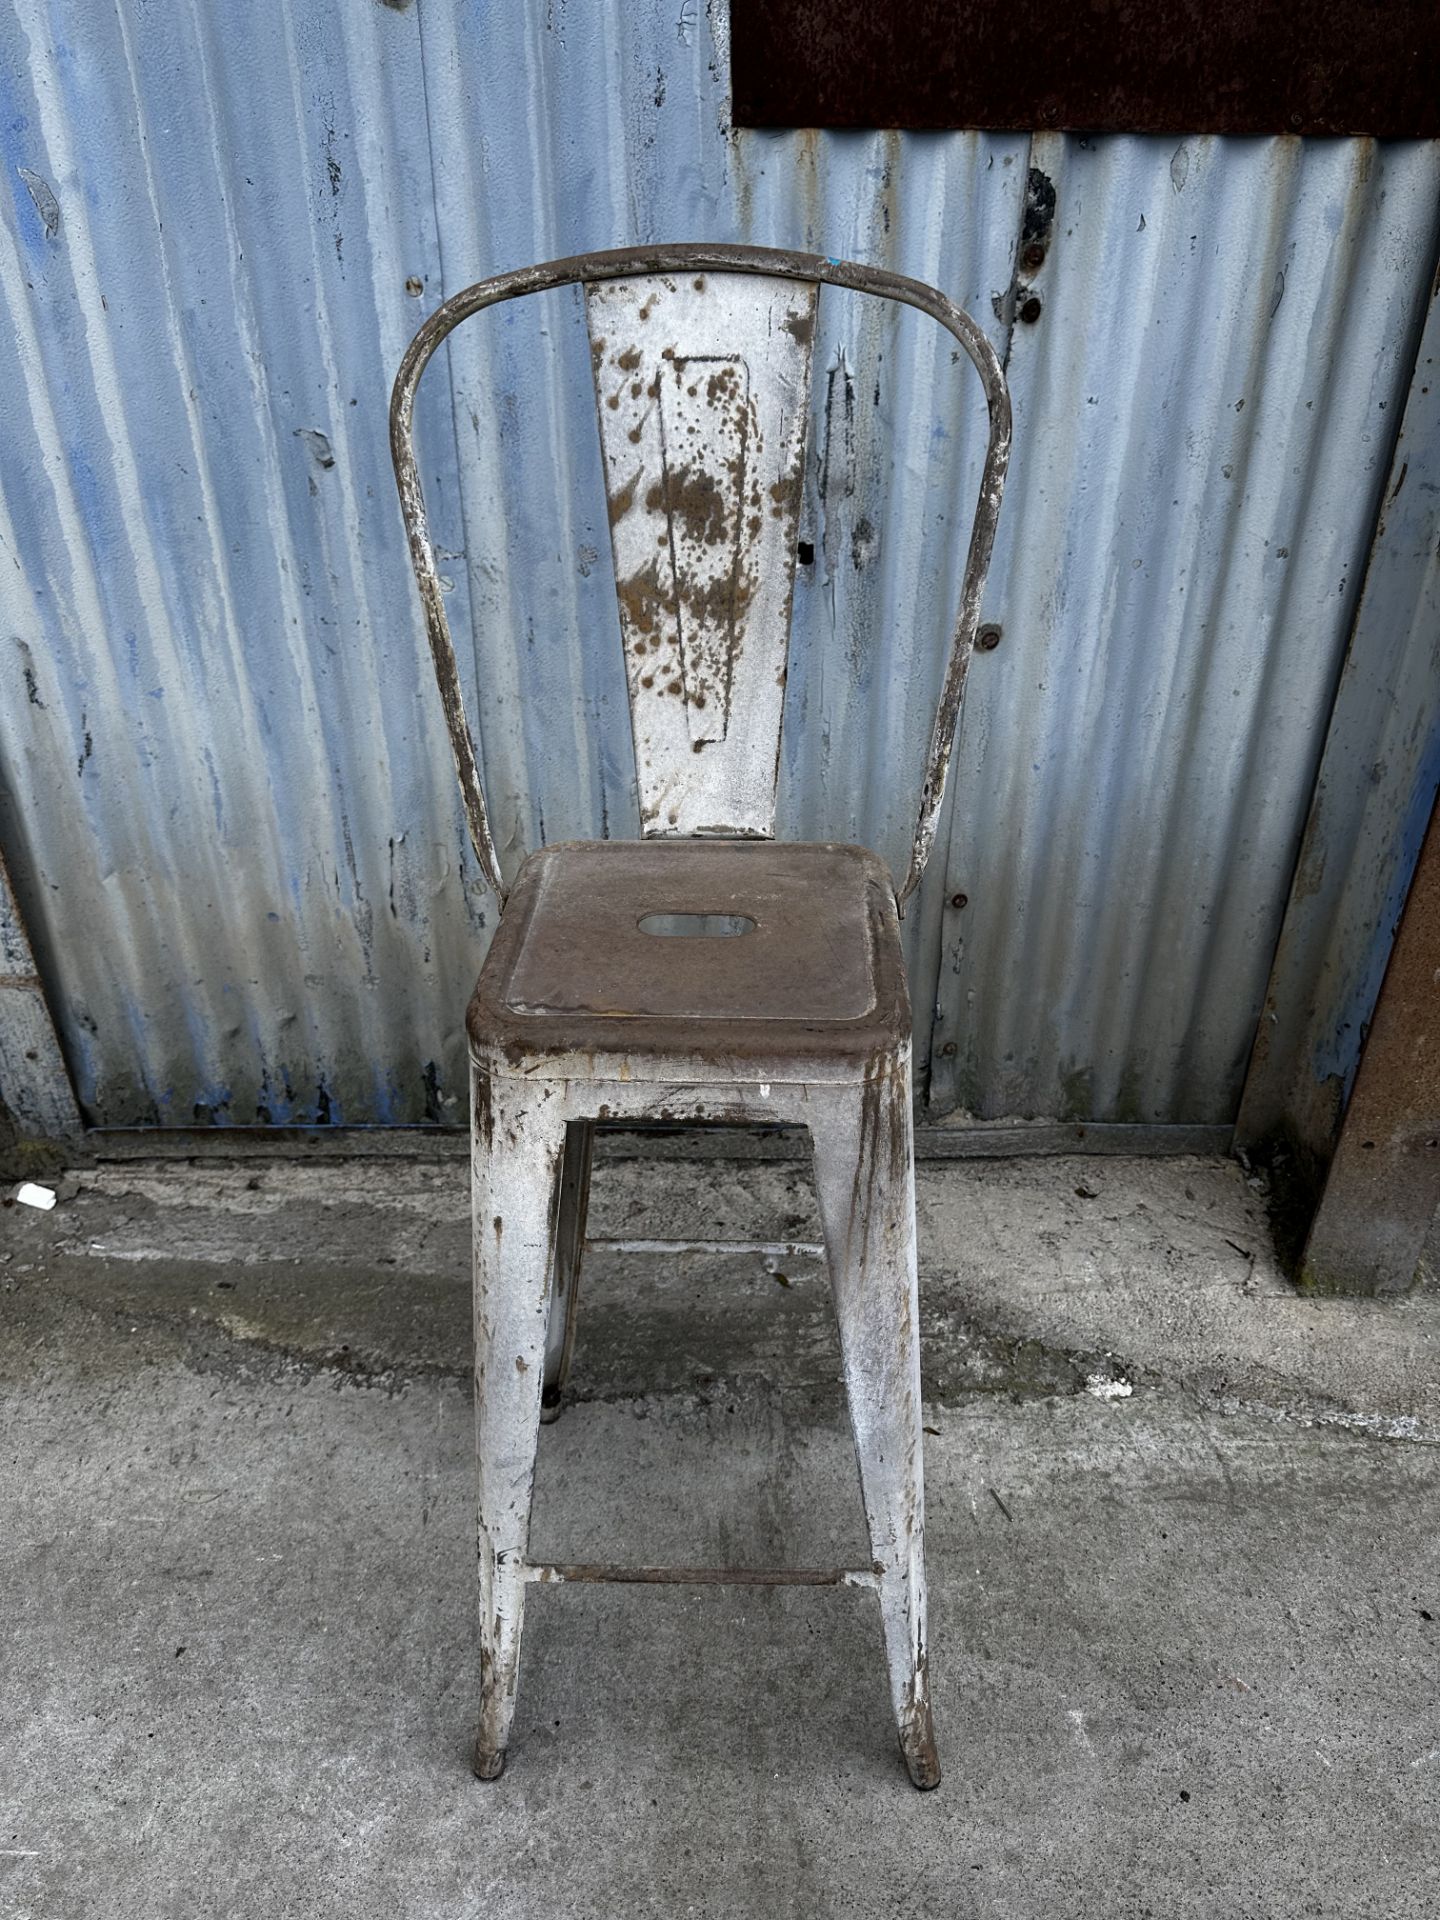 Single Metal High Bar Chair, Shabby Retro Condition Sourced From Luxury House Clearance